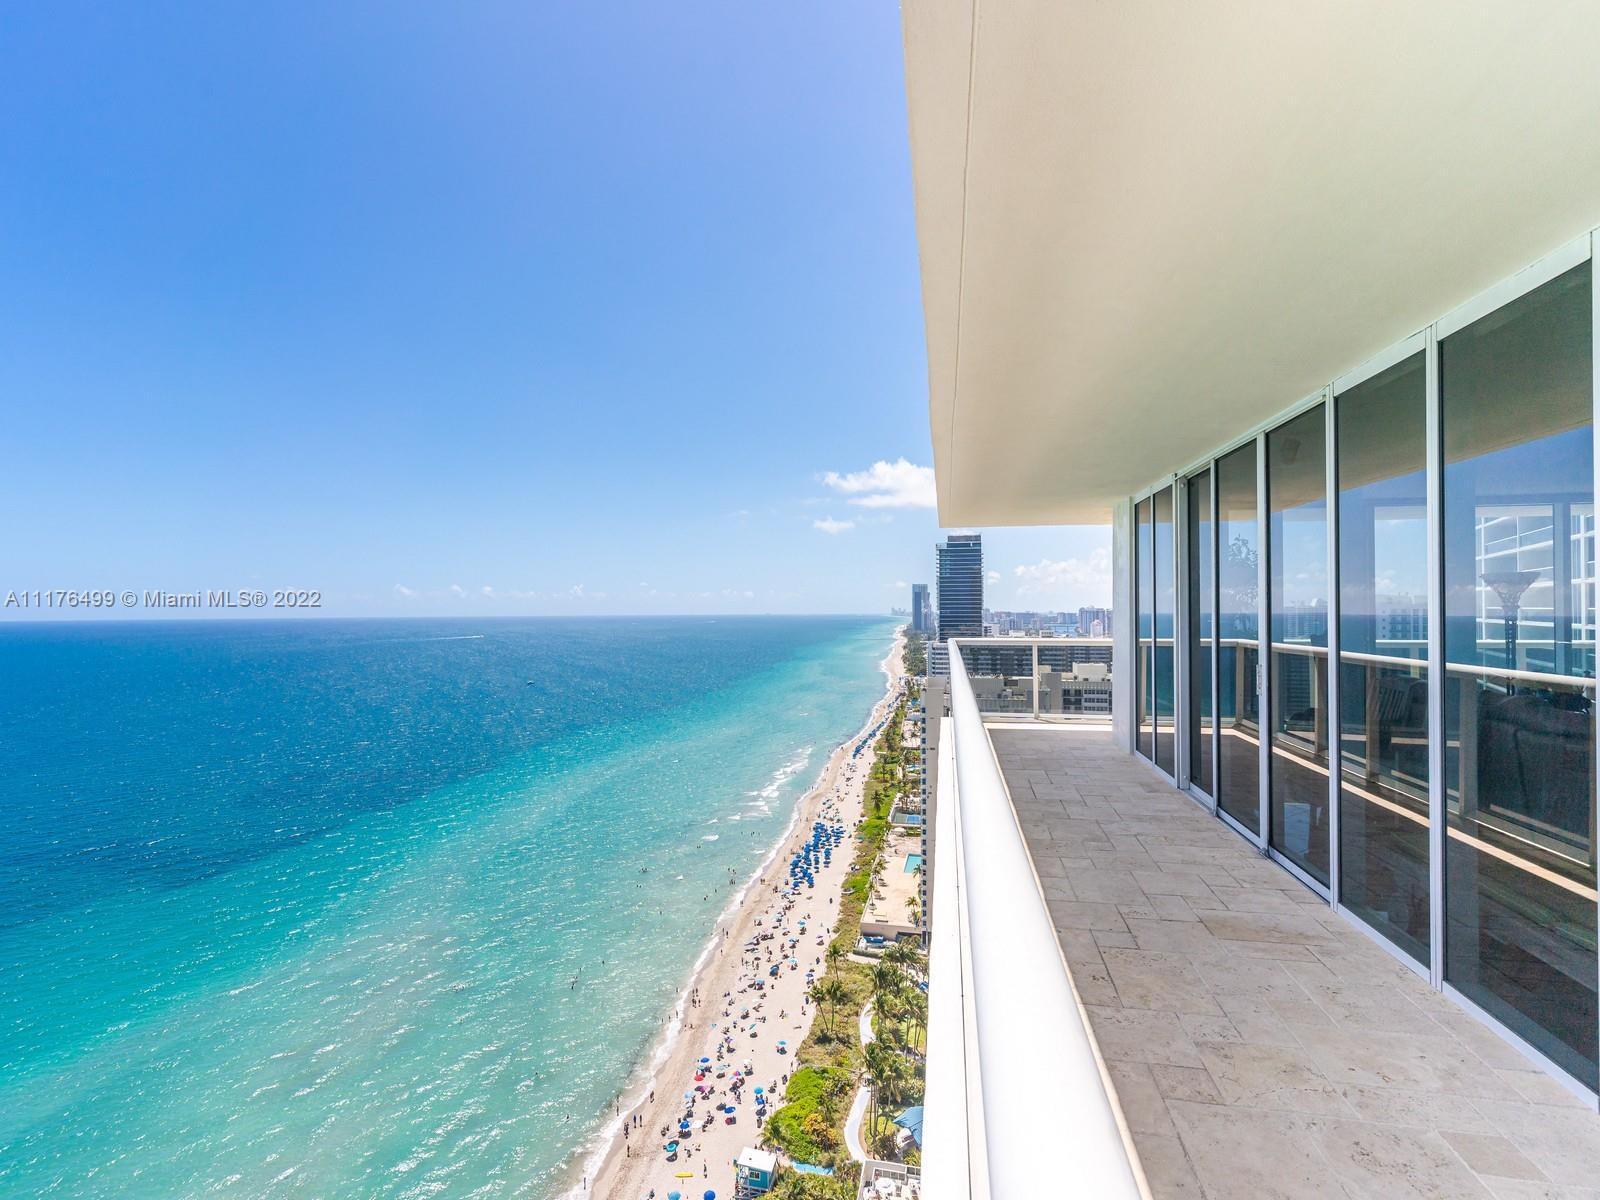 DIRECT OCEAN VIEW FROM THIS AMAZING 3/3, SOUTH EASTCORNER UNIT, W/ A HUGE WRAP AROUND TERRACE OVER 500 SQ FT. Walk in & fall in love. This is for sure one of the best luxurious SE corner, City Views all the way to Miami Beach, the most desirable line at the Beach Club. High Rise with marble floors throughout bright, impact windows. Master and second bedroom has access to the balcony. Washer and Dryer inside. This is a 5 star Beach Resort like amenities such as magnificent 2-story lobby entrance, full time concierge & security, 24-hour valet, multi-level covered parking, 5 heated pools with the bar, 50.000 sq.ft. SPA, fitness center overlooking the Atlantic Ocean. Close to Ft Lauderdale airport, Bal Harbour shops, Aventura Mall, & many restaurants. You can rent 12 times a year, min 30 days.